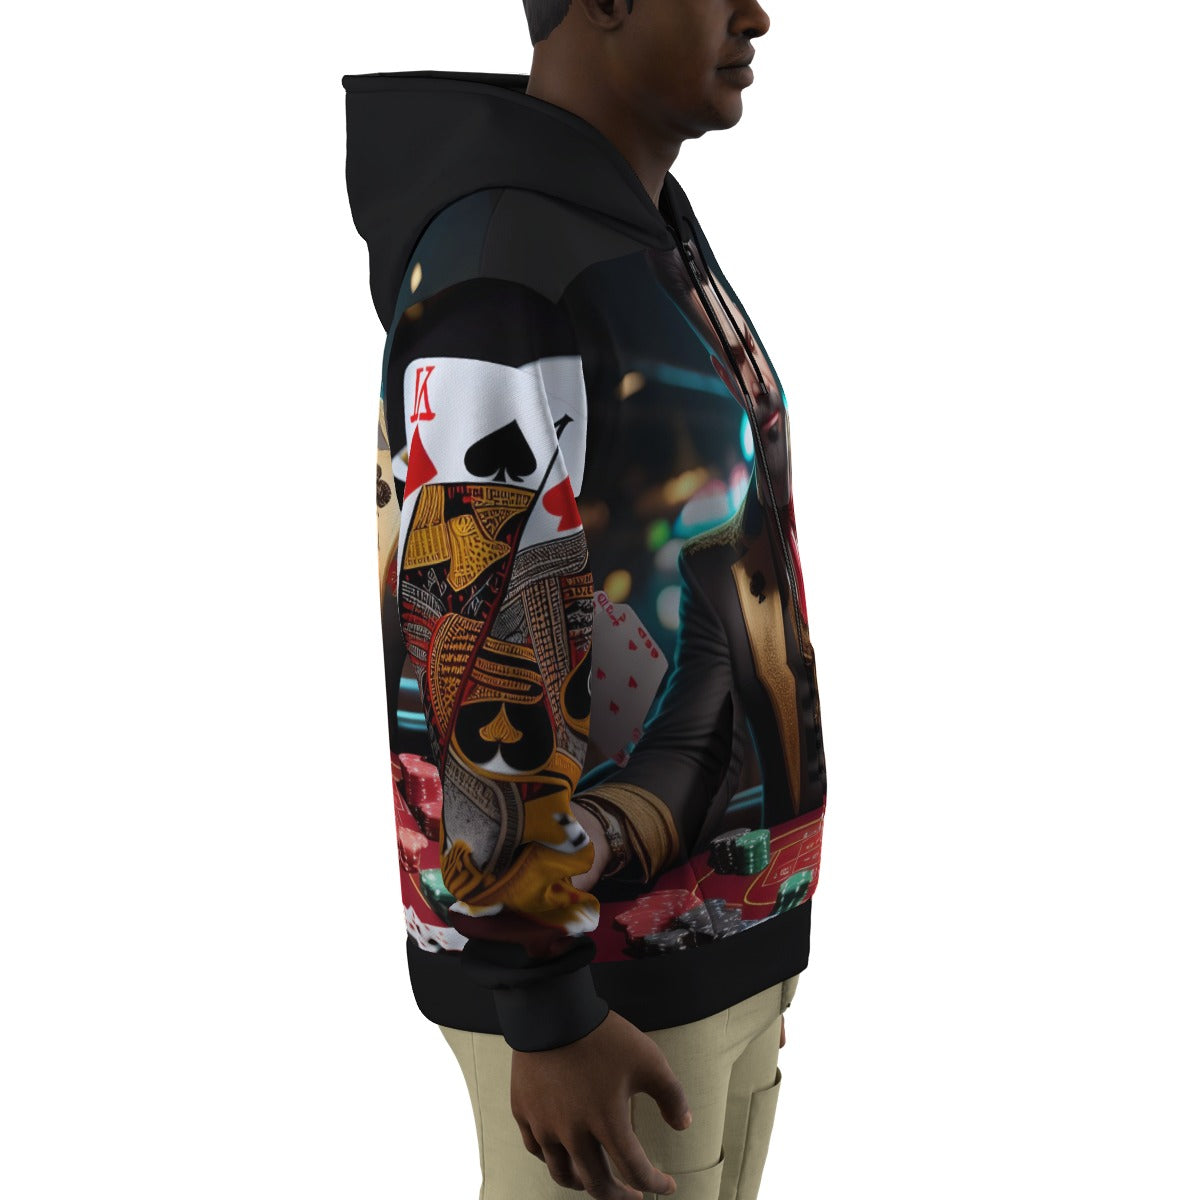 All-Over Print Zip Up Hoodie With Pocket Casino Art